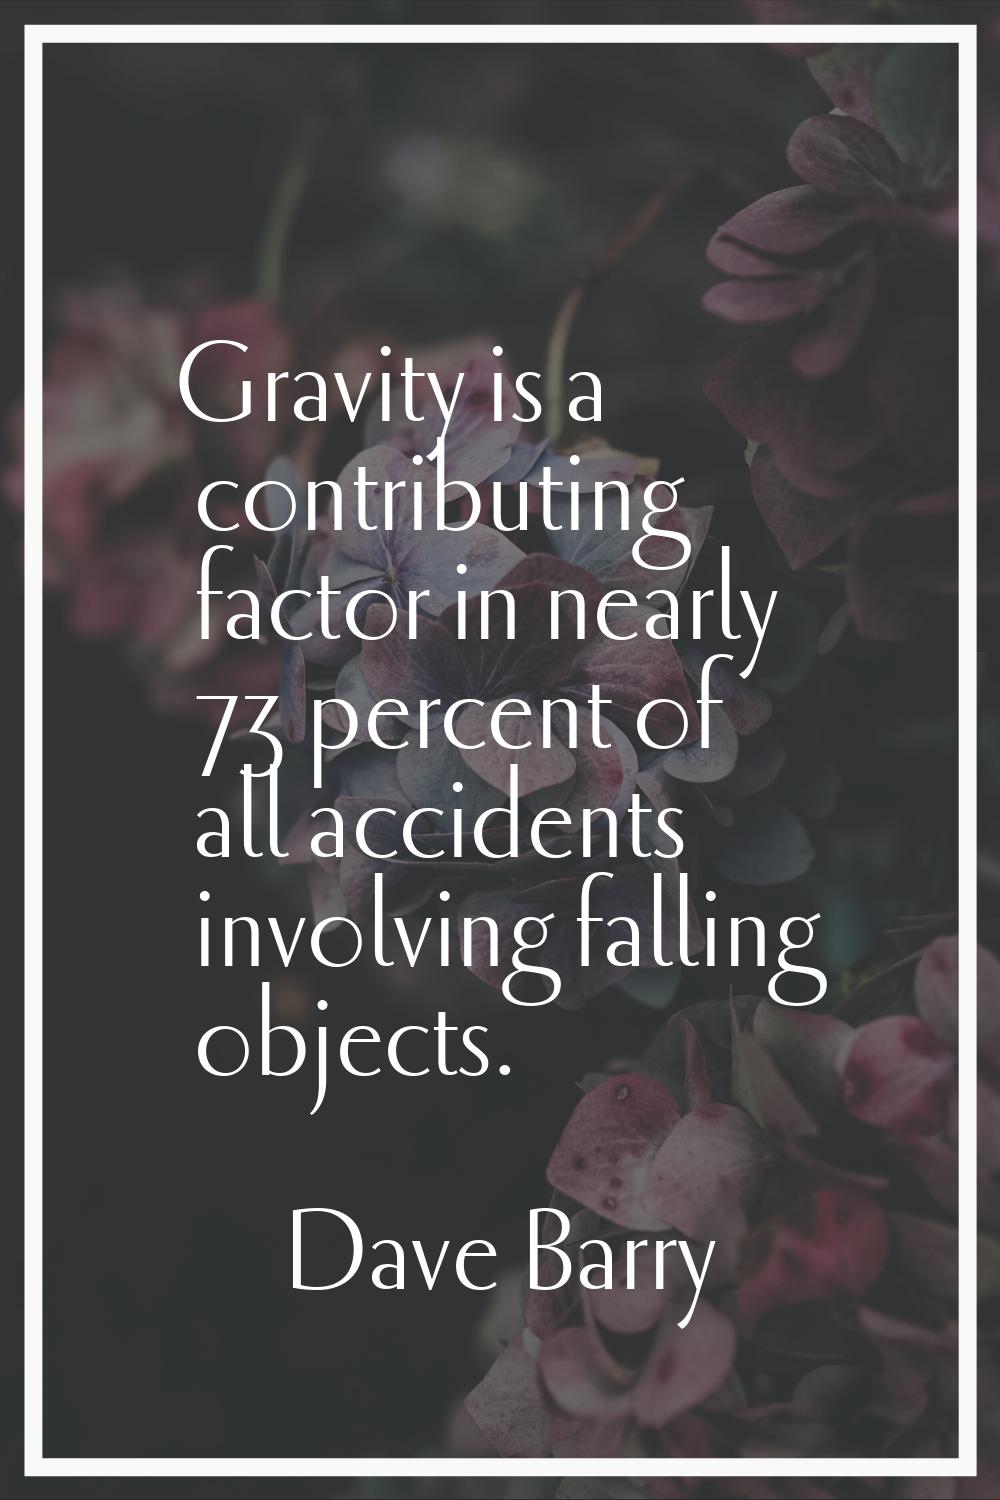 Gravity is a contributing factor in nearly 73 percent of all accidents involving falling objects.